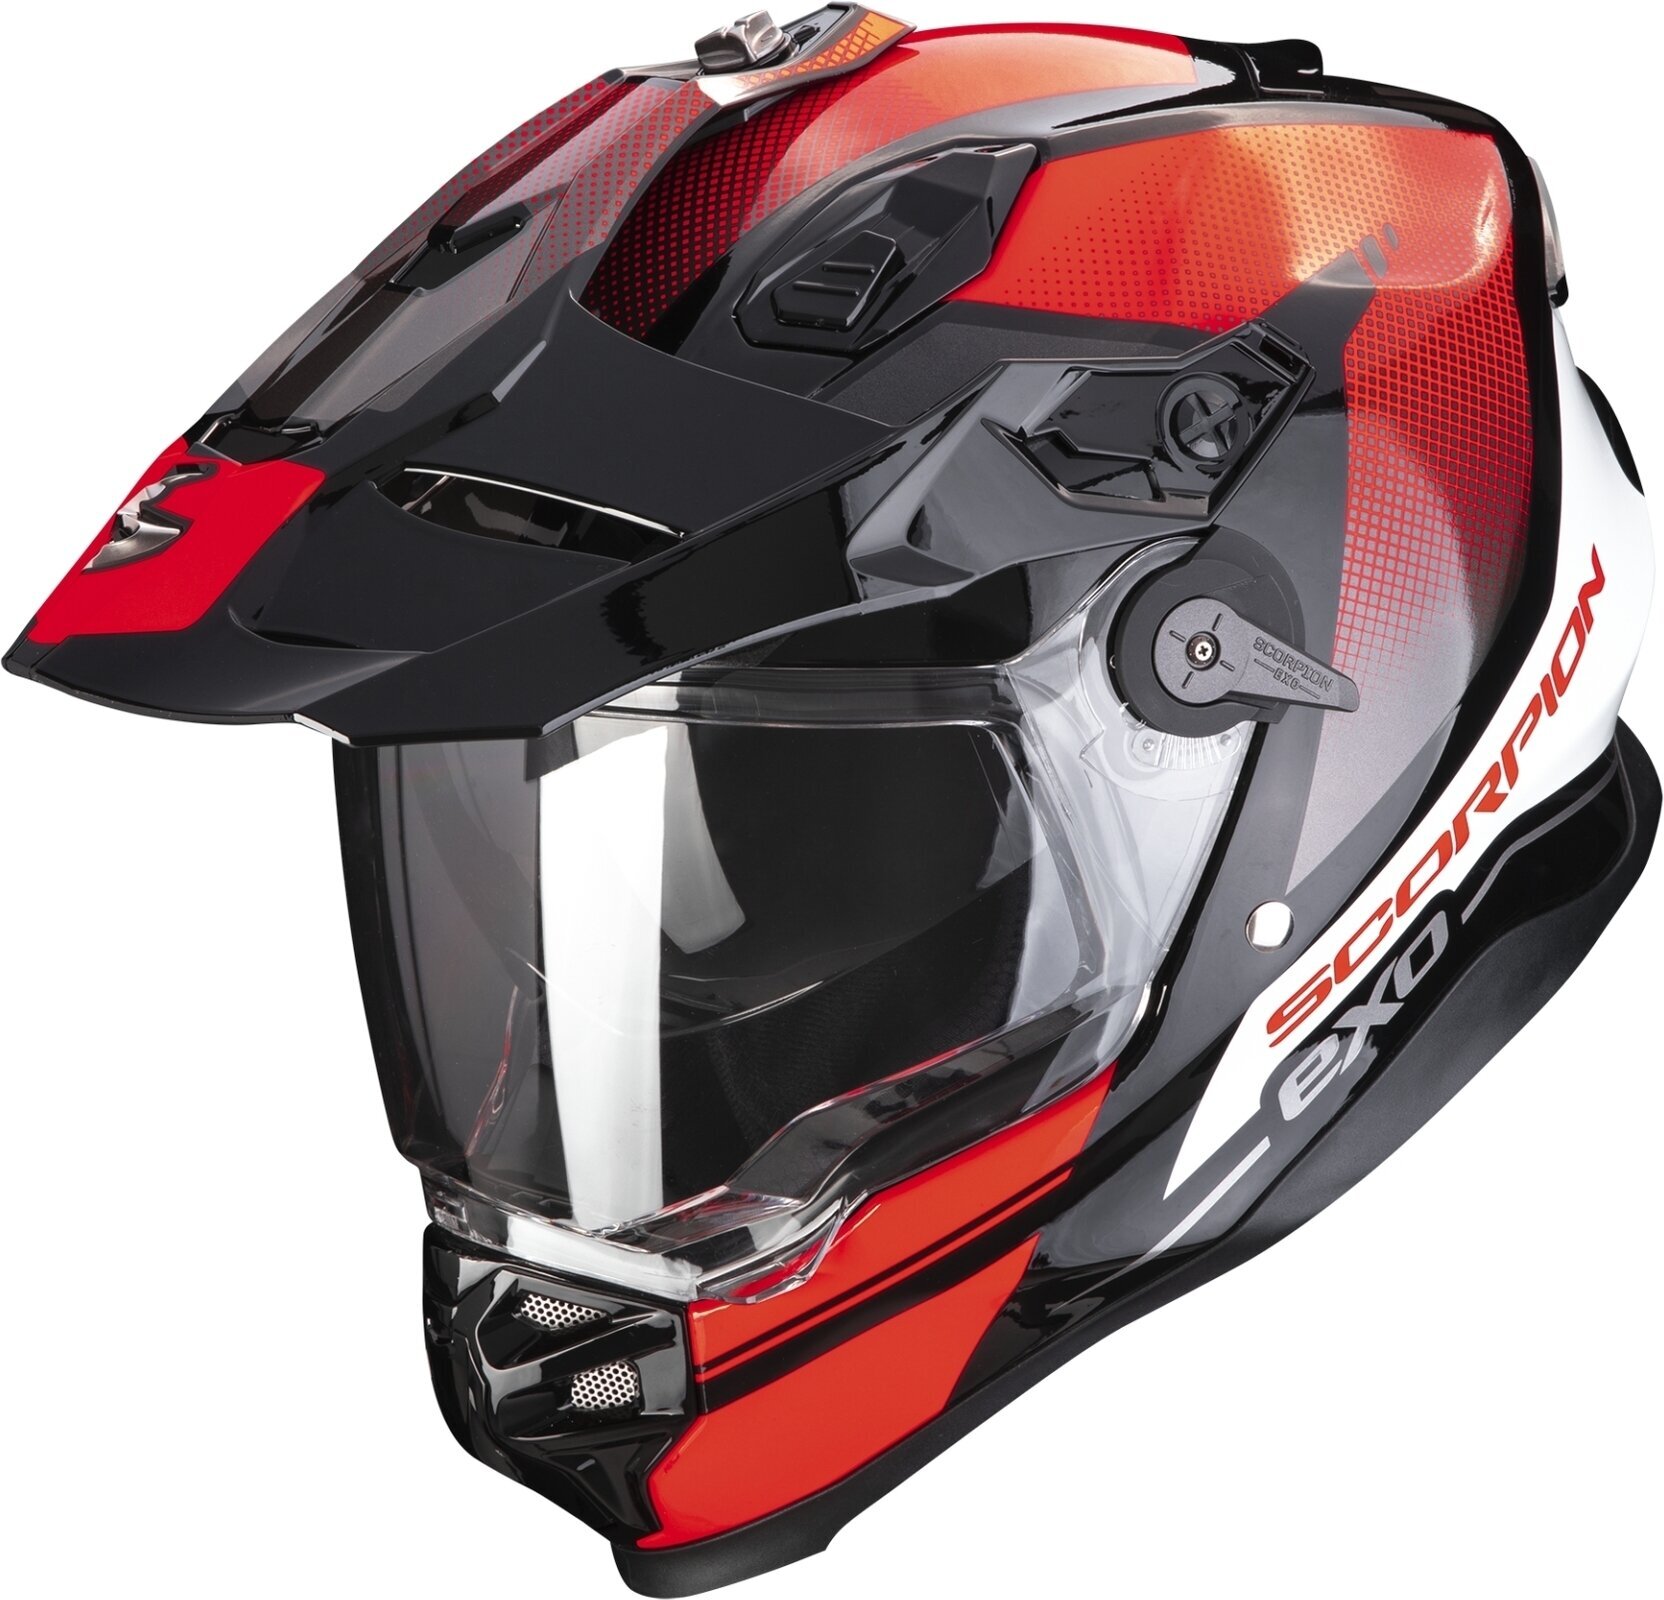 Kask Scorpion ADF-9000 AIR TRAIL Black/Red S Kask